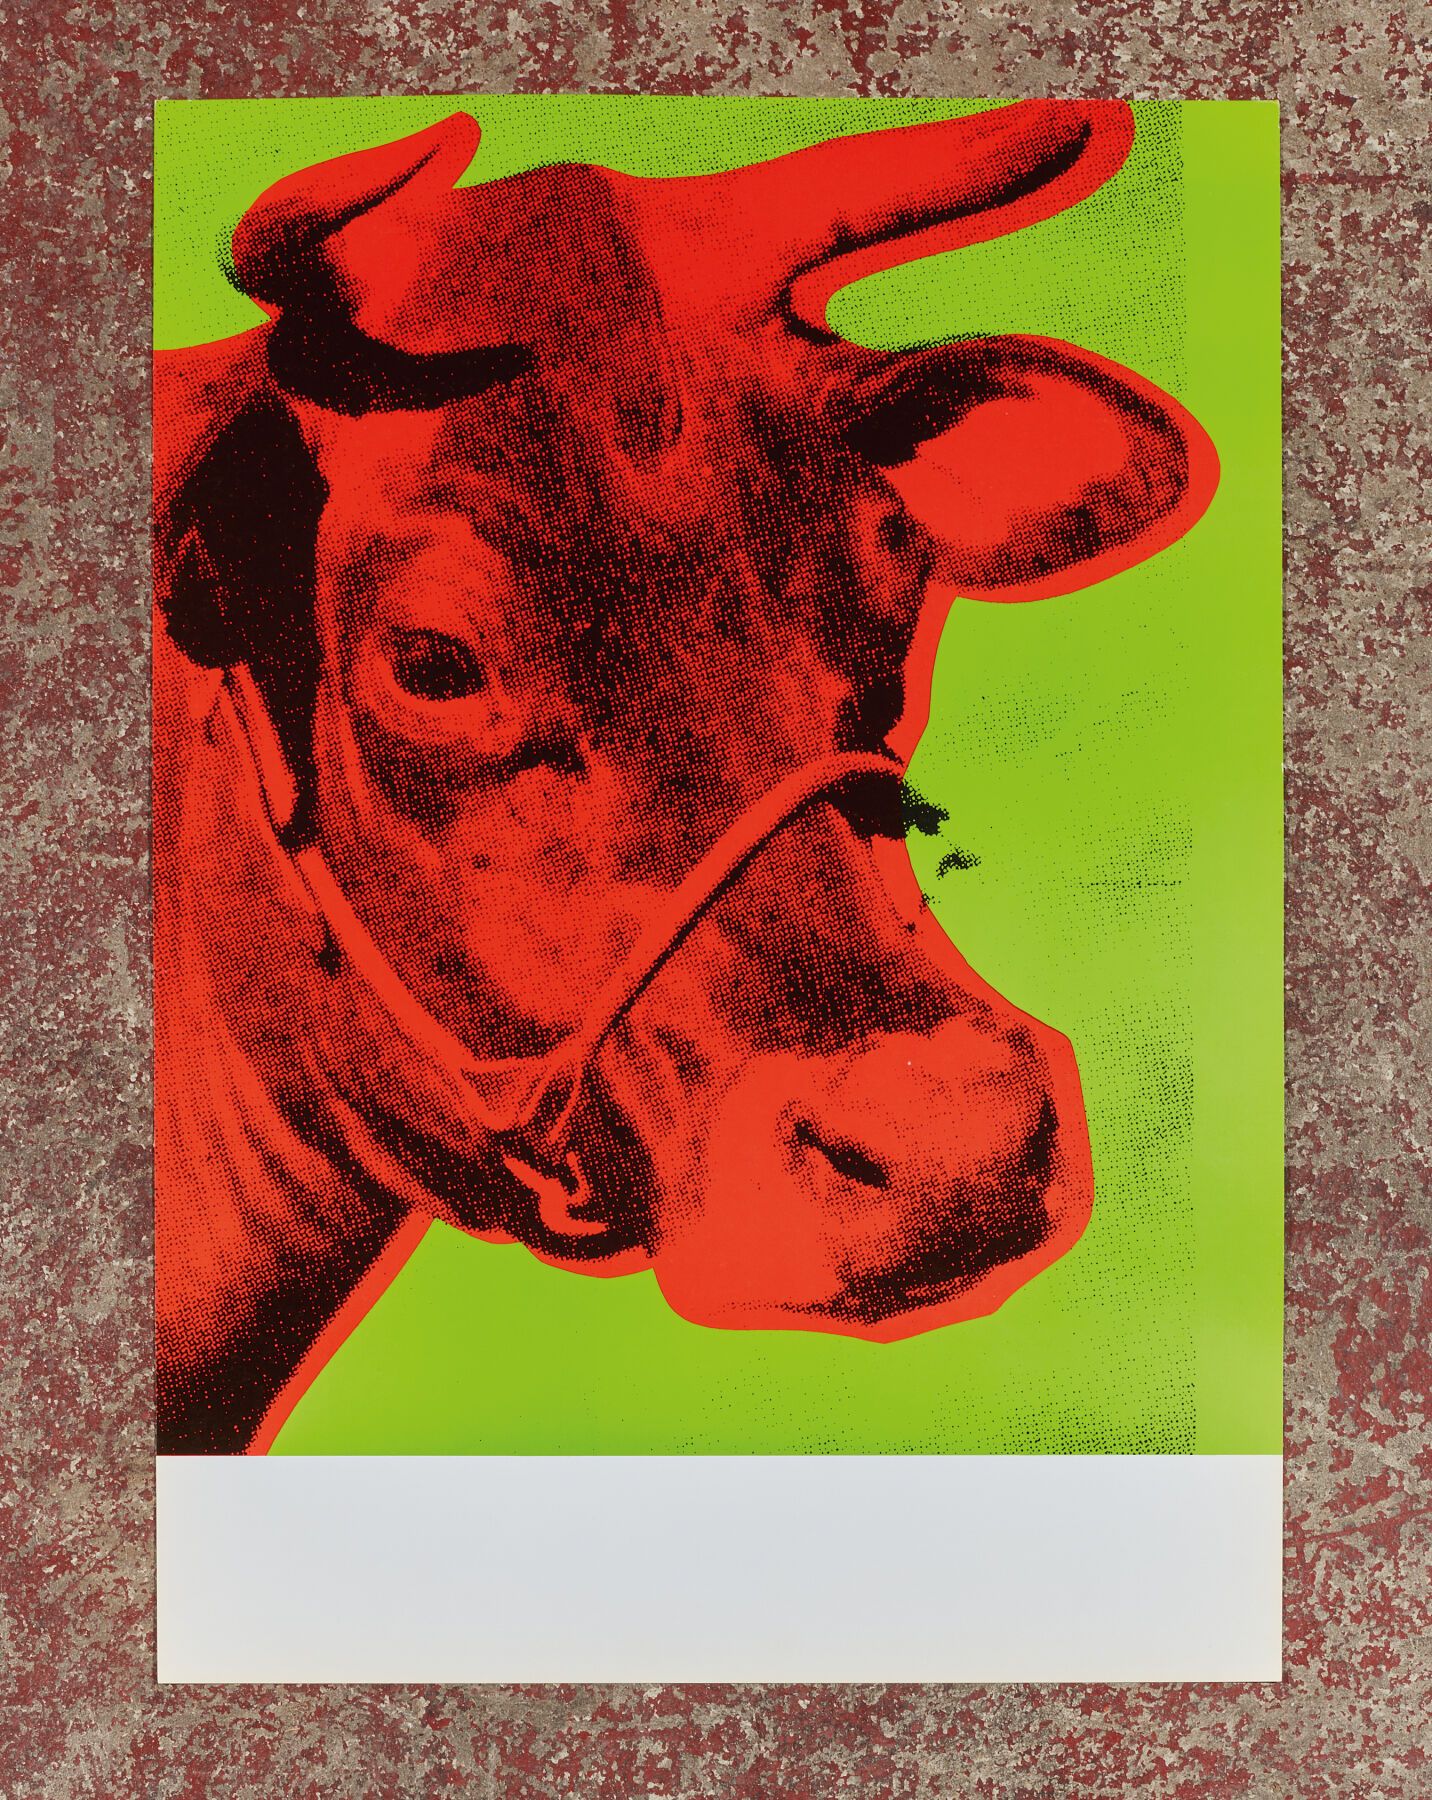 Null Andy WARHOL (nach).
Rote Kuh - 1970.
Offset-Lithografie auf Papier.
Poster &hellip;